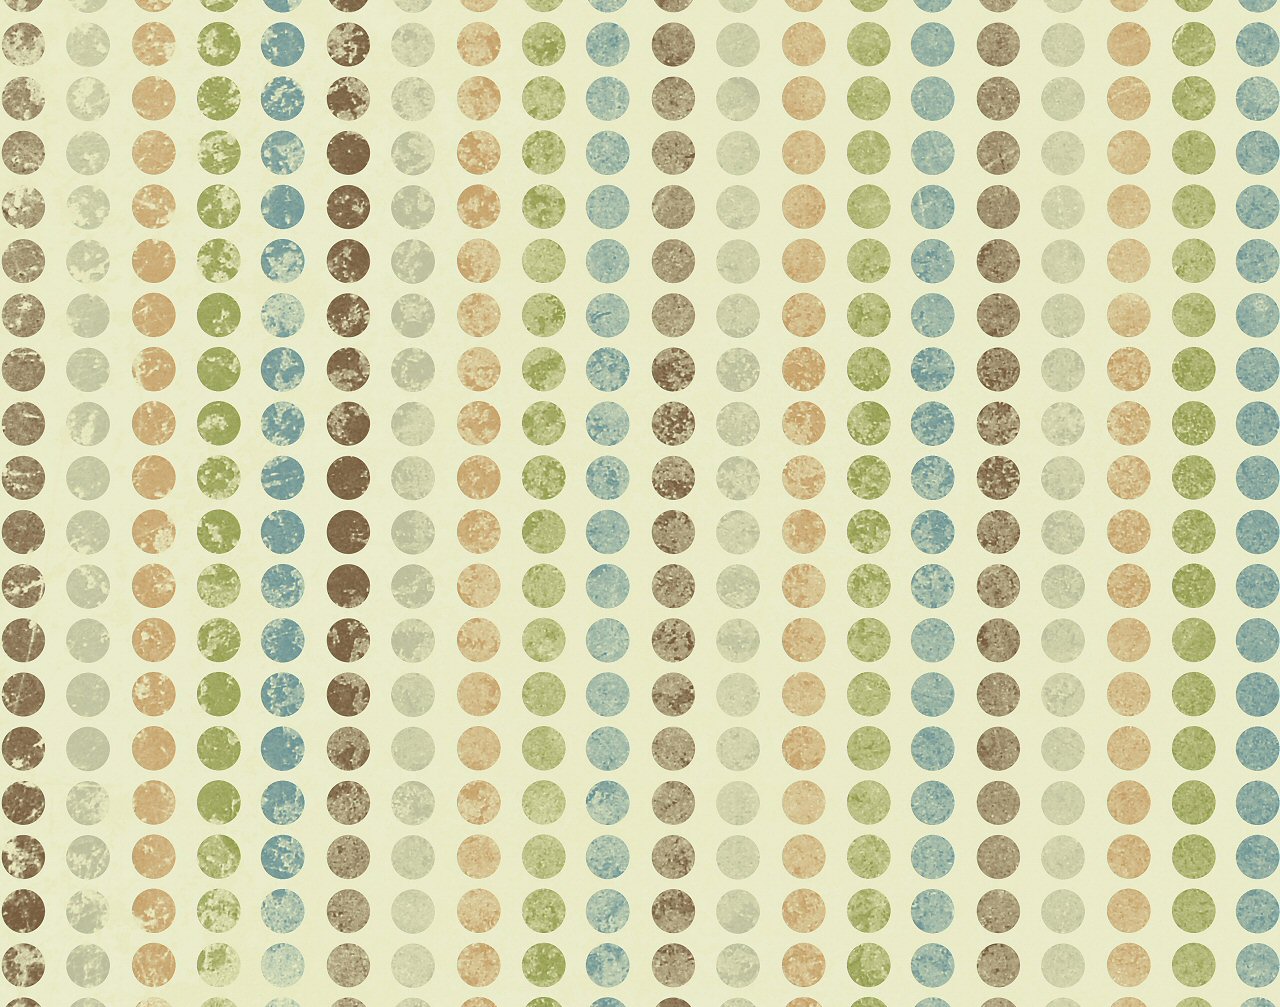 Grungy Dots Backgrounds